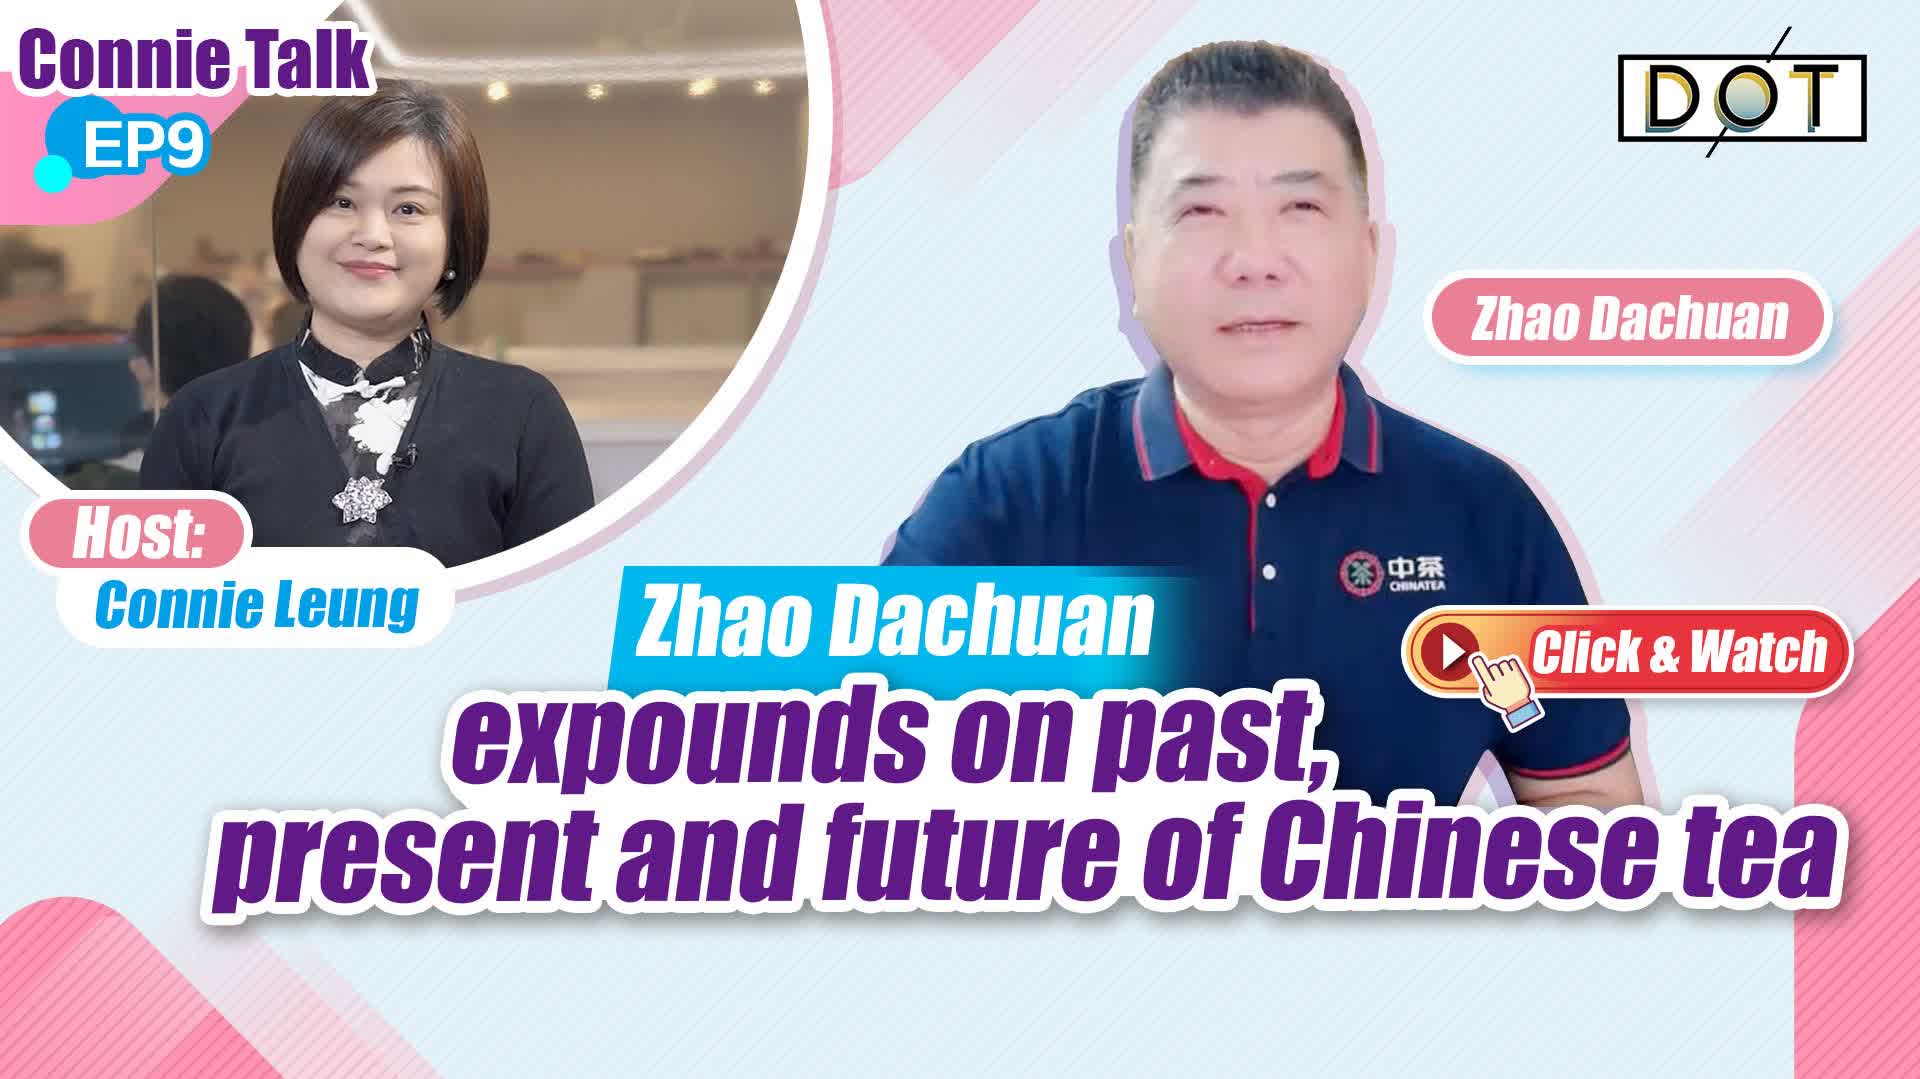 Connie Talk EP9 | Zhao Dachuan expounds on past, present and future of Chinese tea